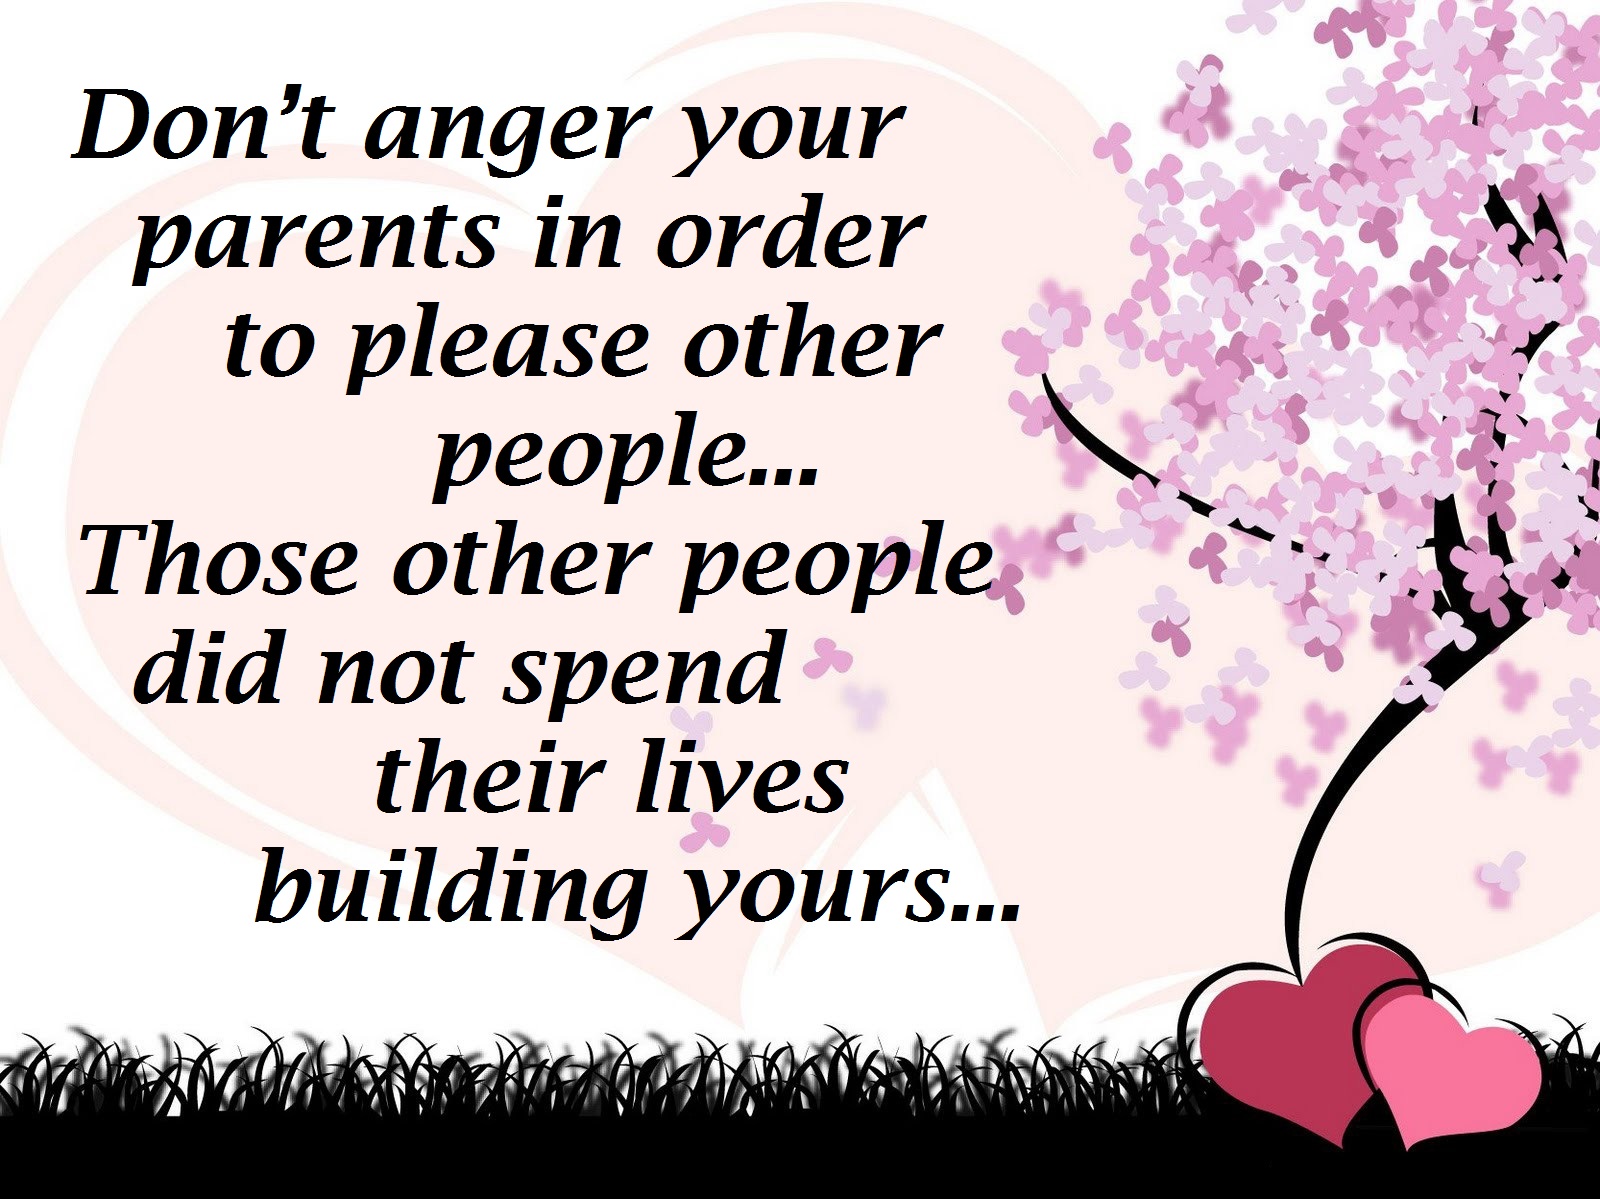 parents day quotes image